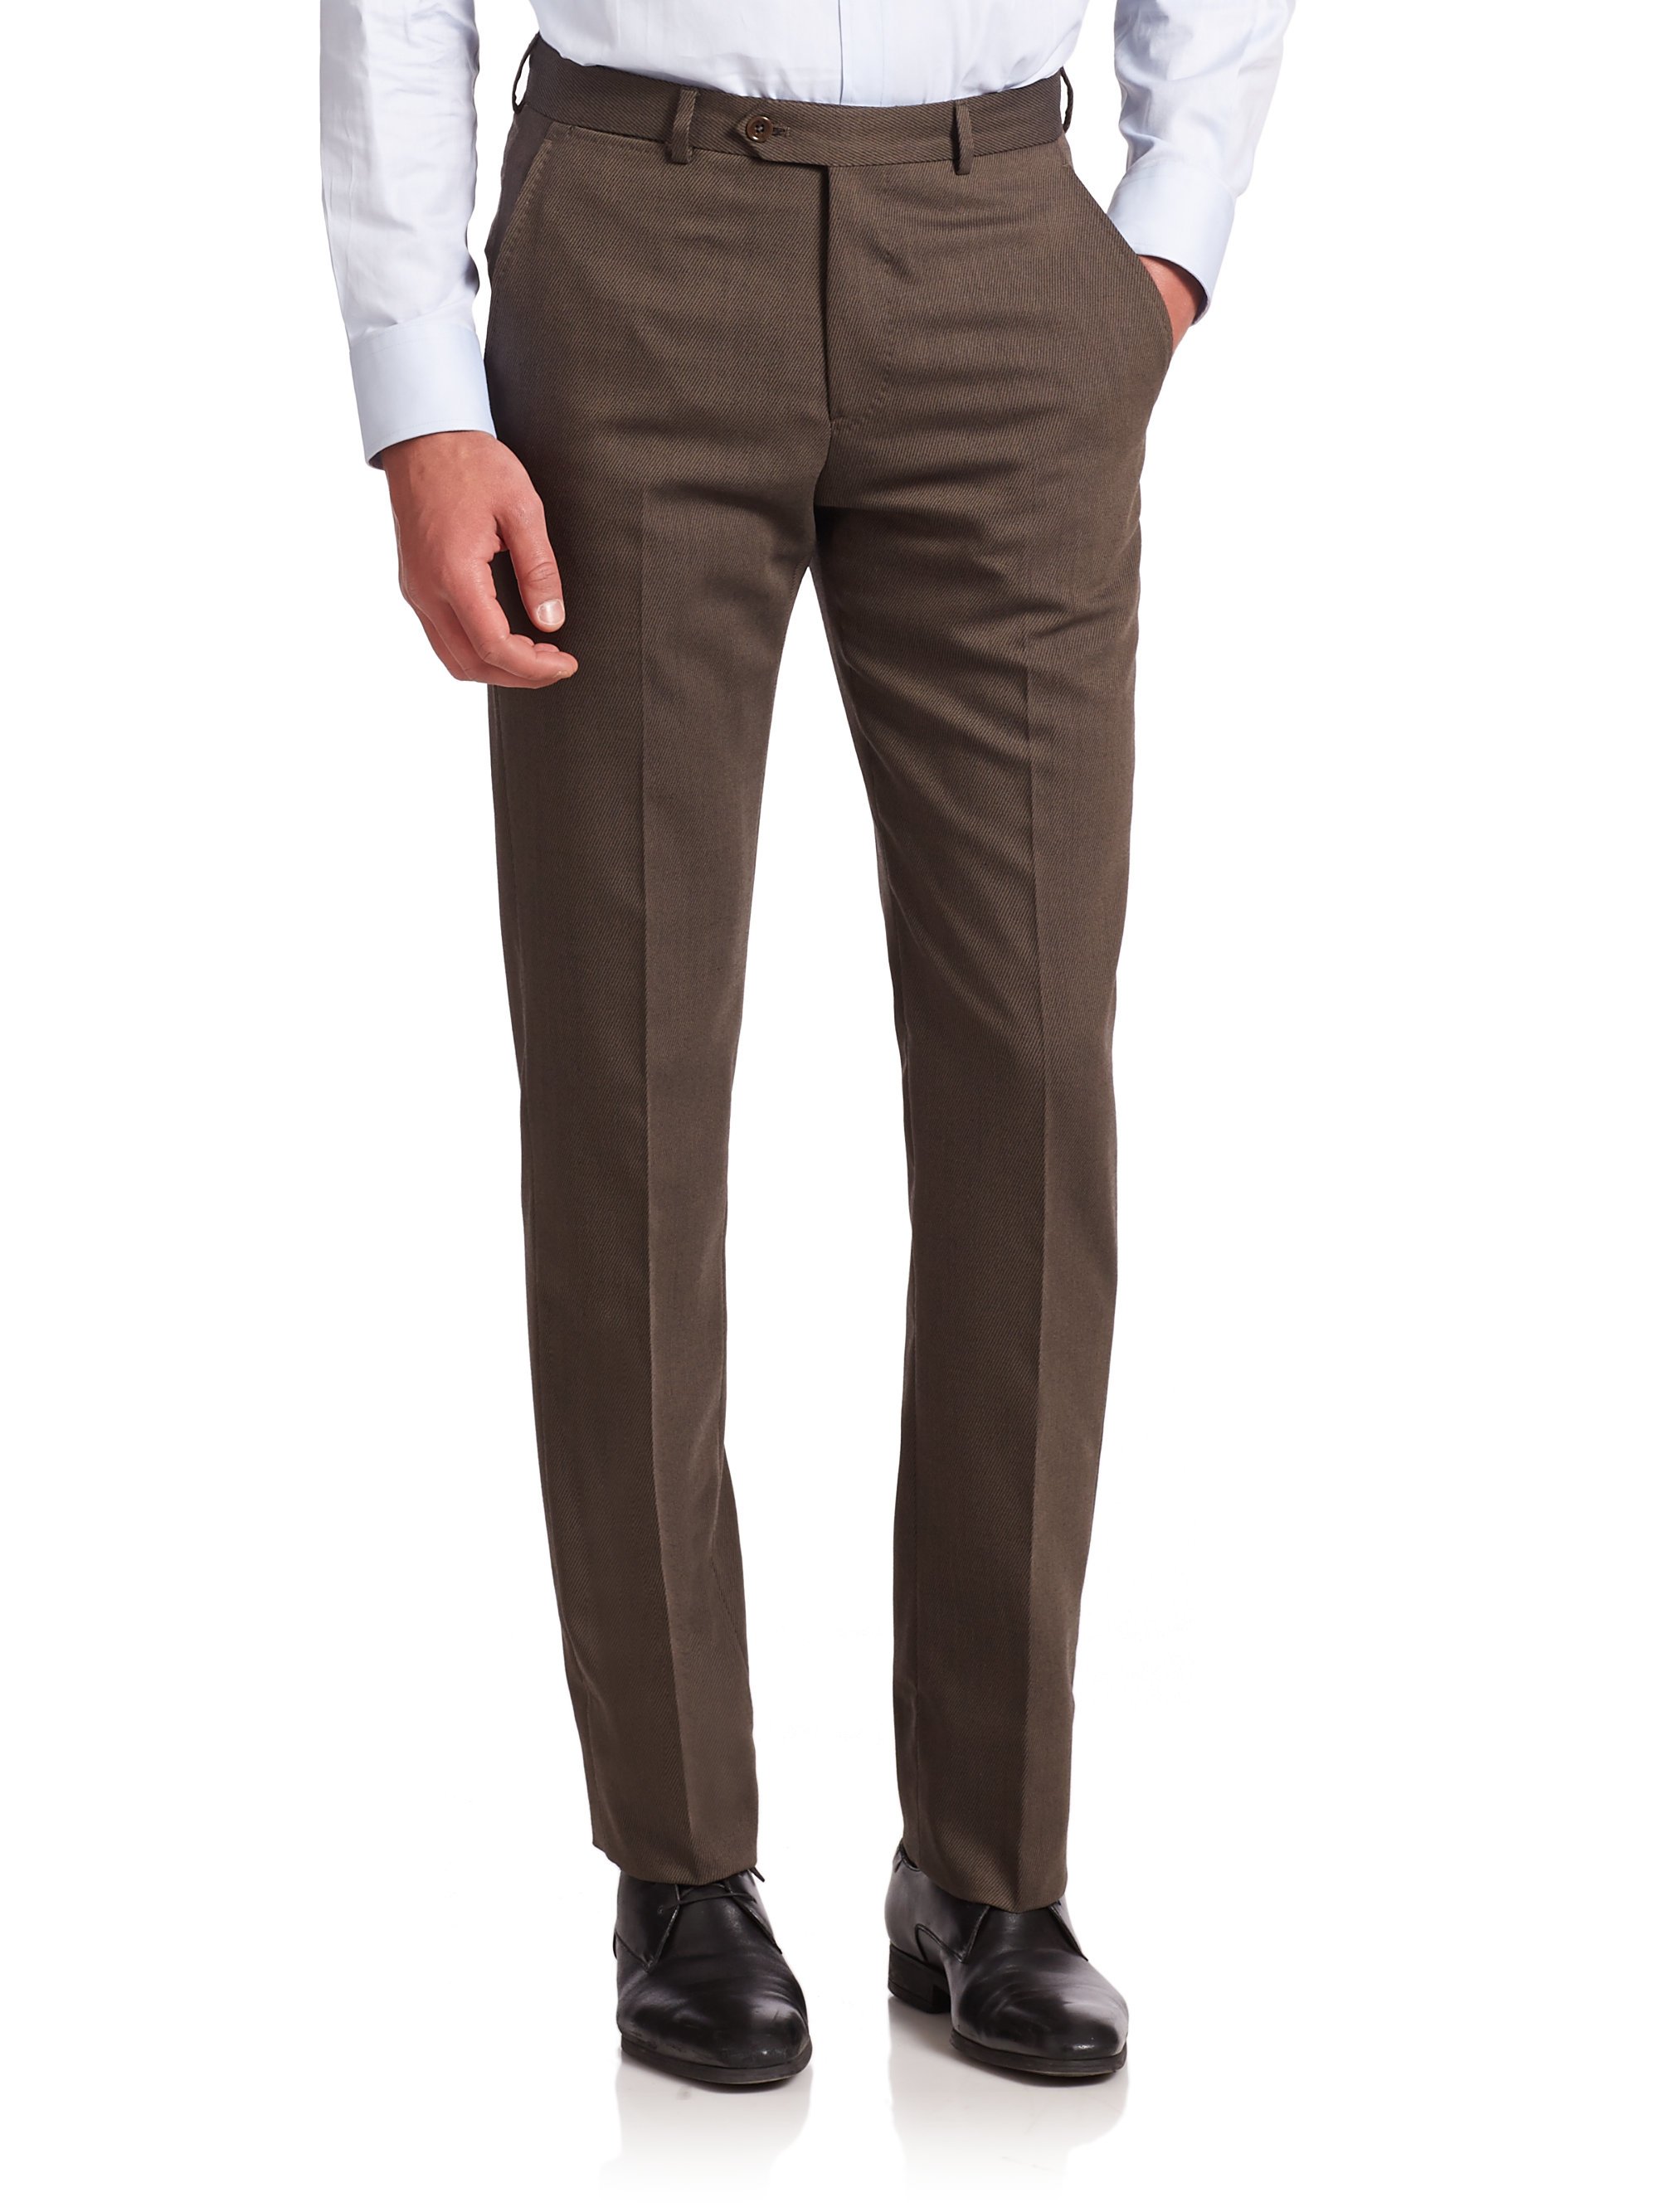 Armani Wool-blend Dress Pants in Brown for Men - Save 73% | Lyst